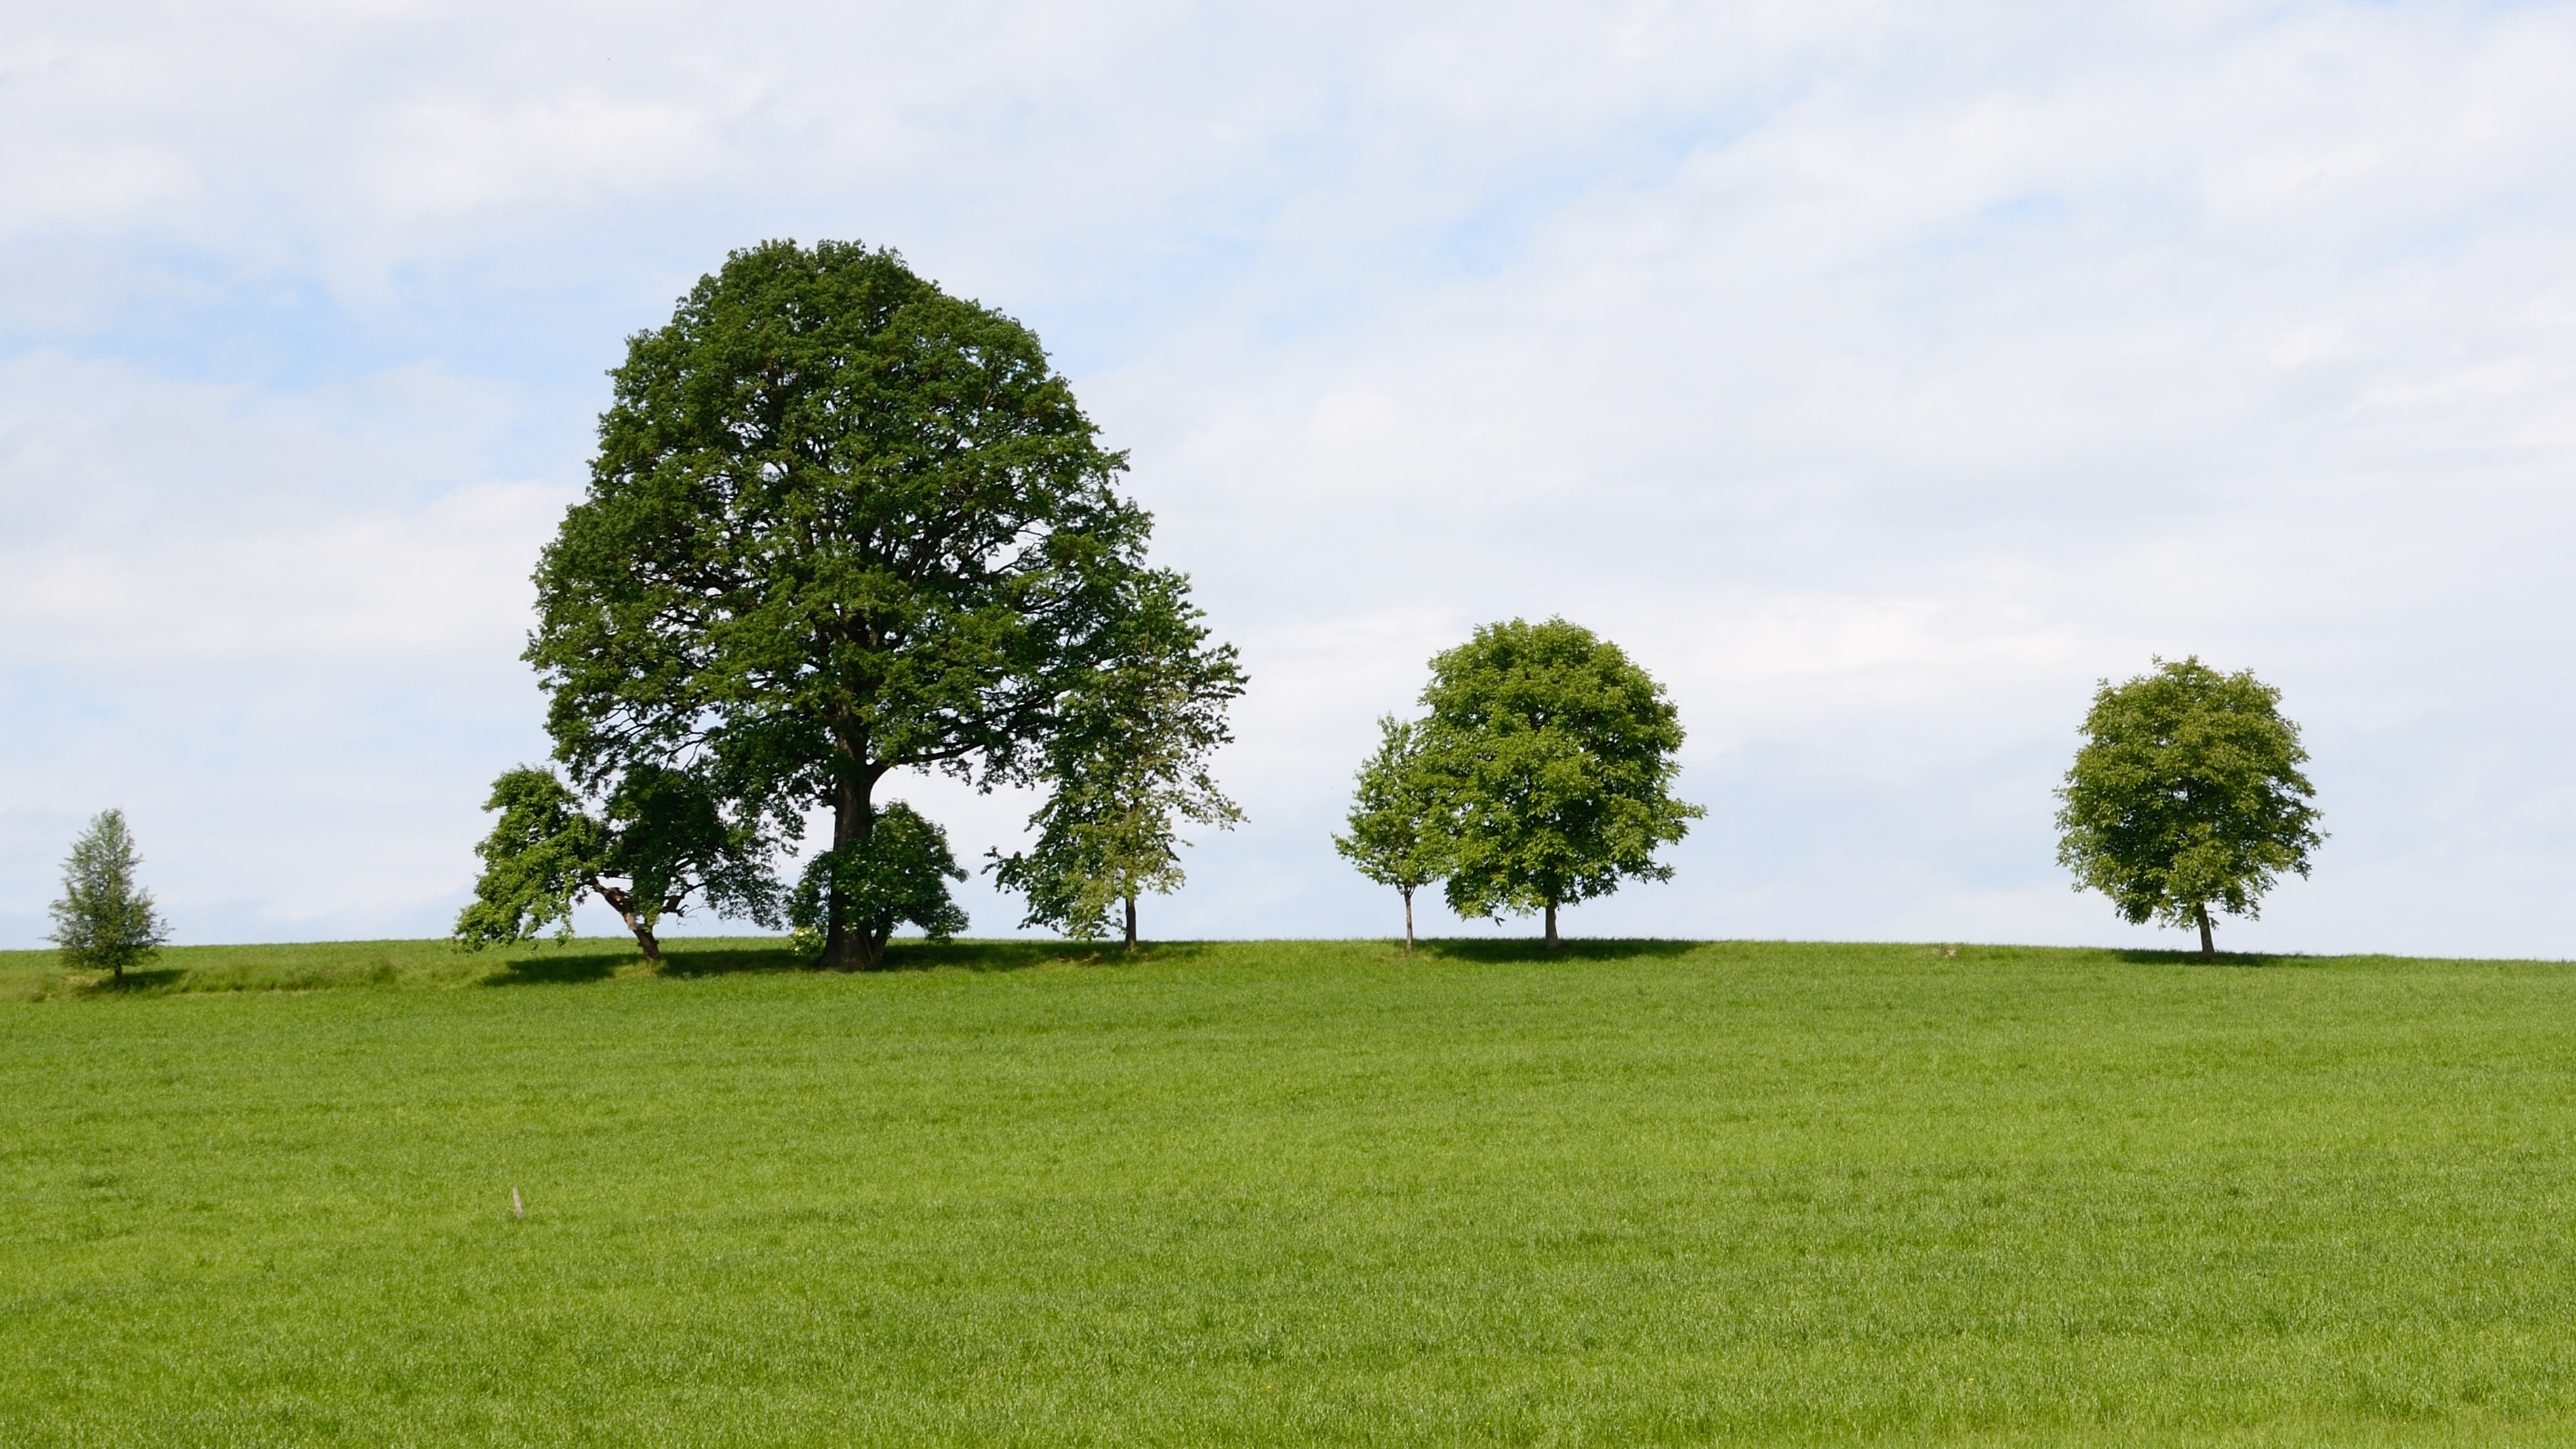 green trees surrounded by green grass field during daytime